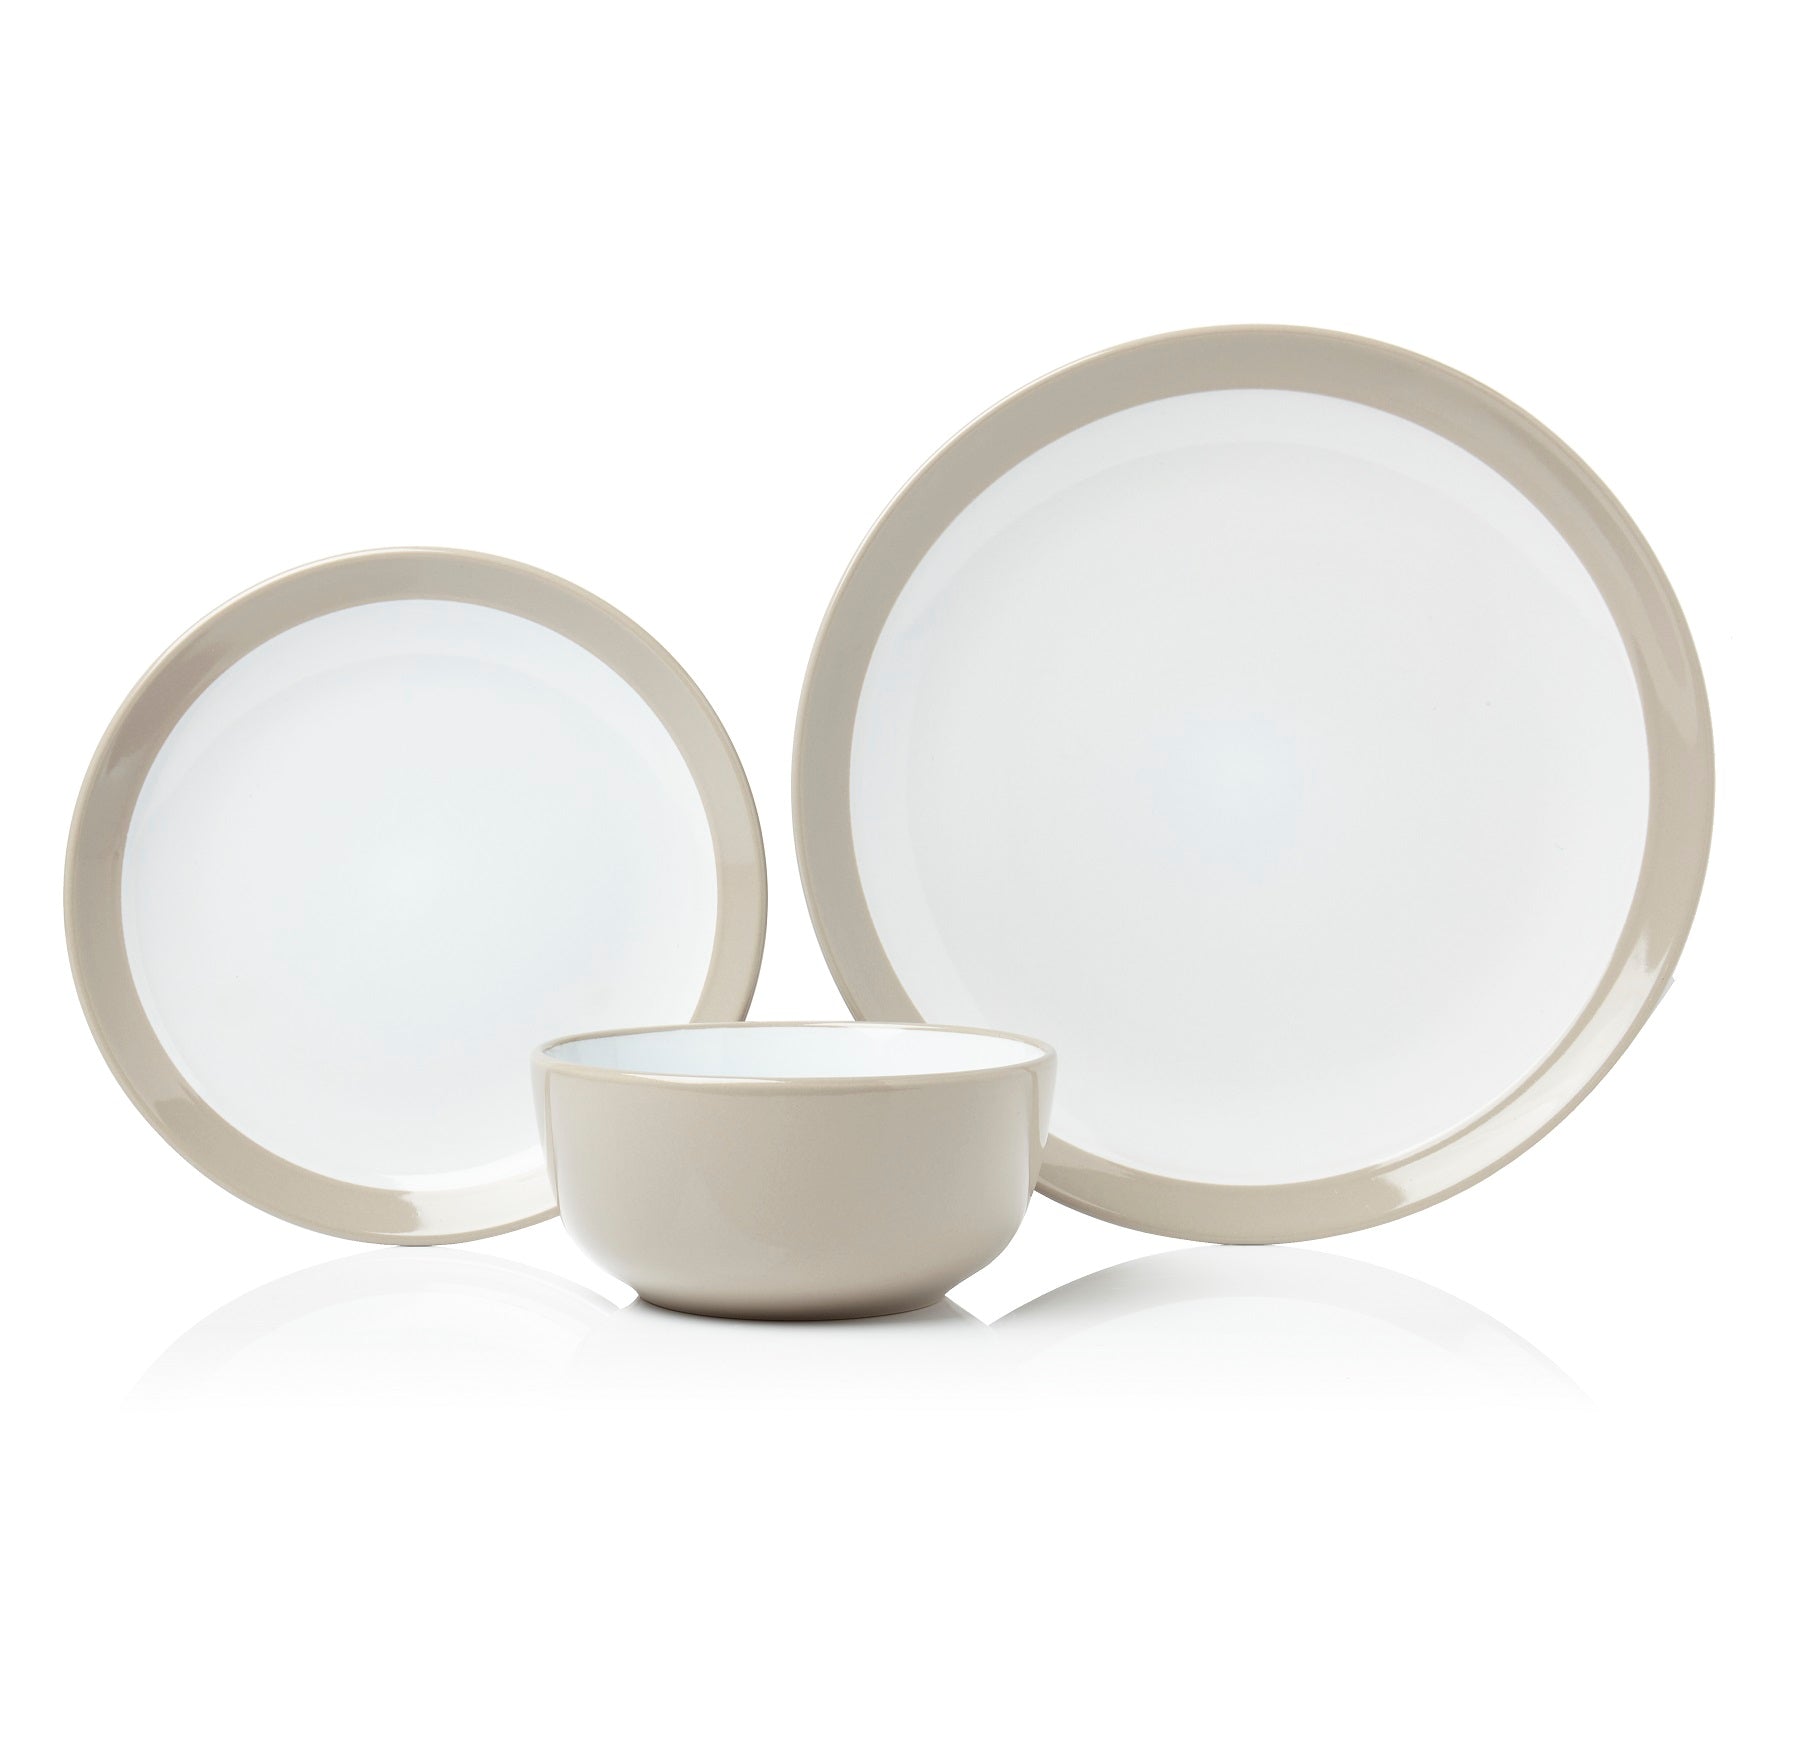 12pc Stoneware Glossy Putty Two-Toned Dinner Set